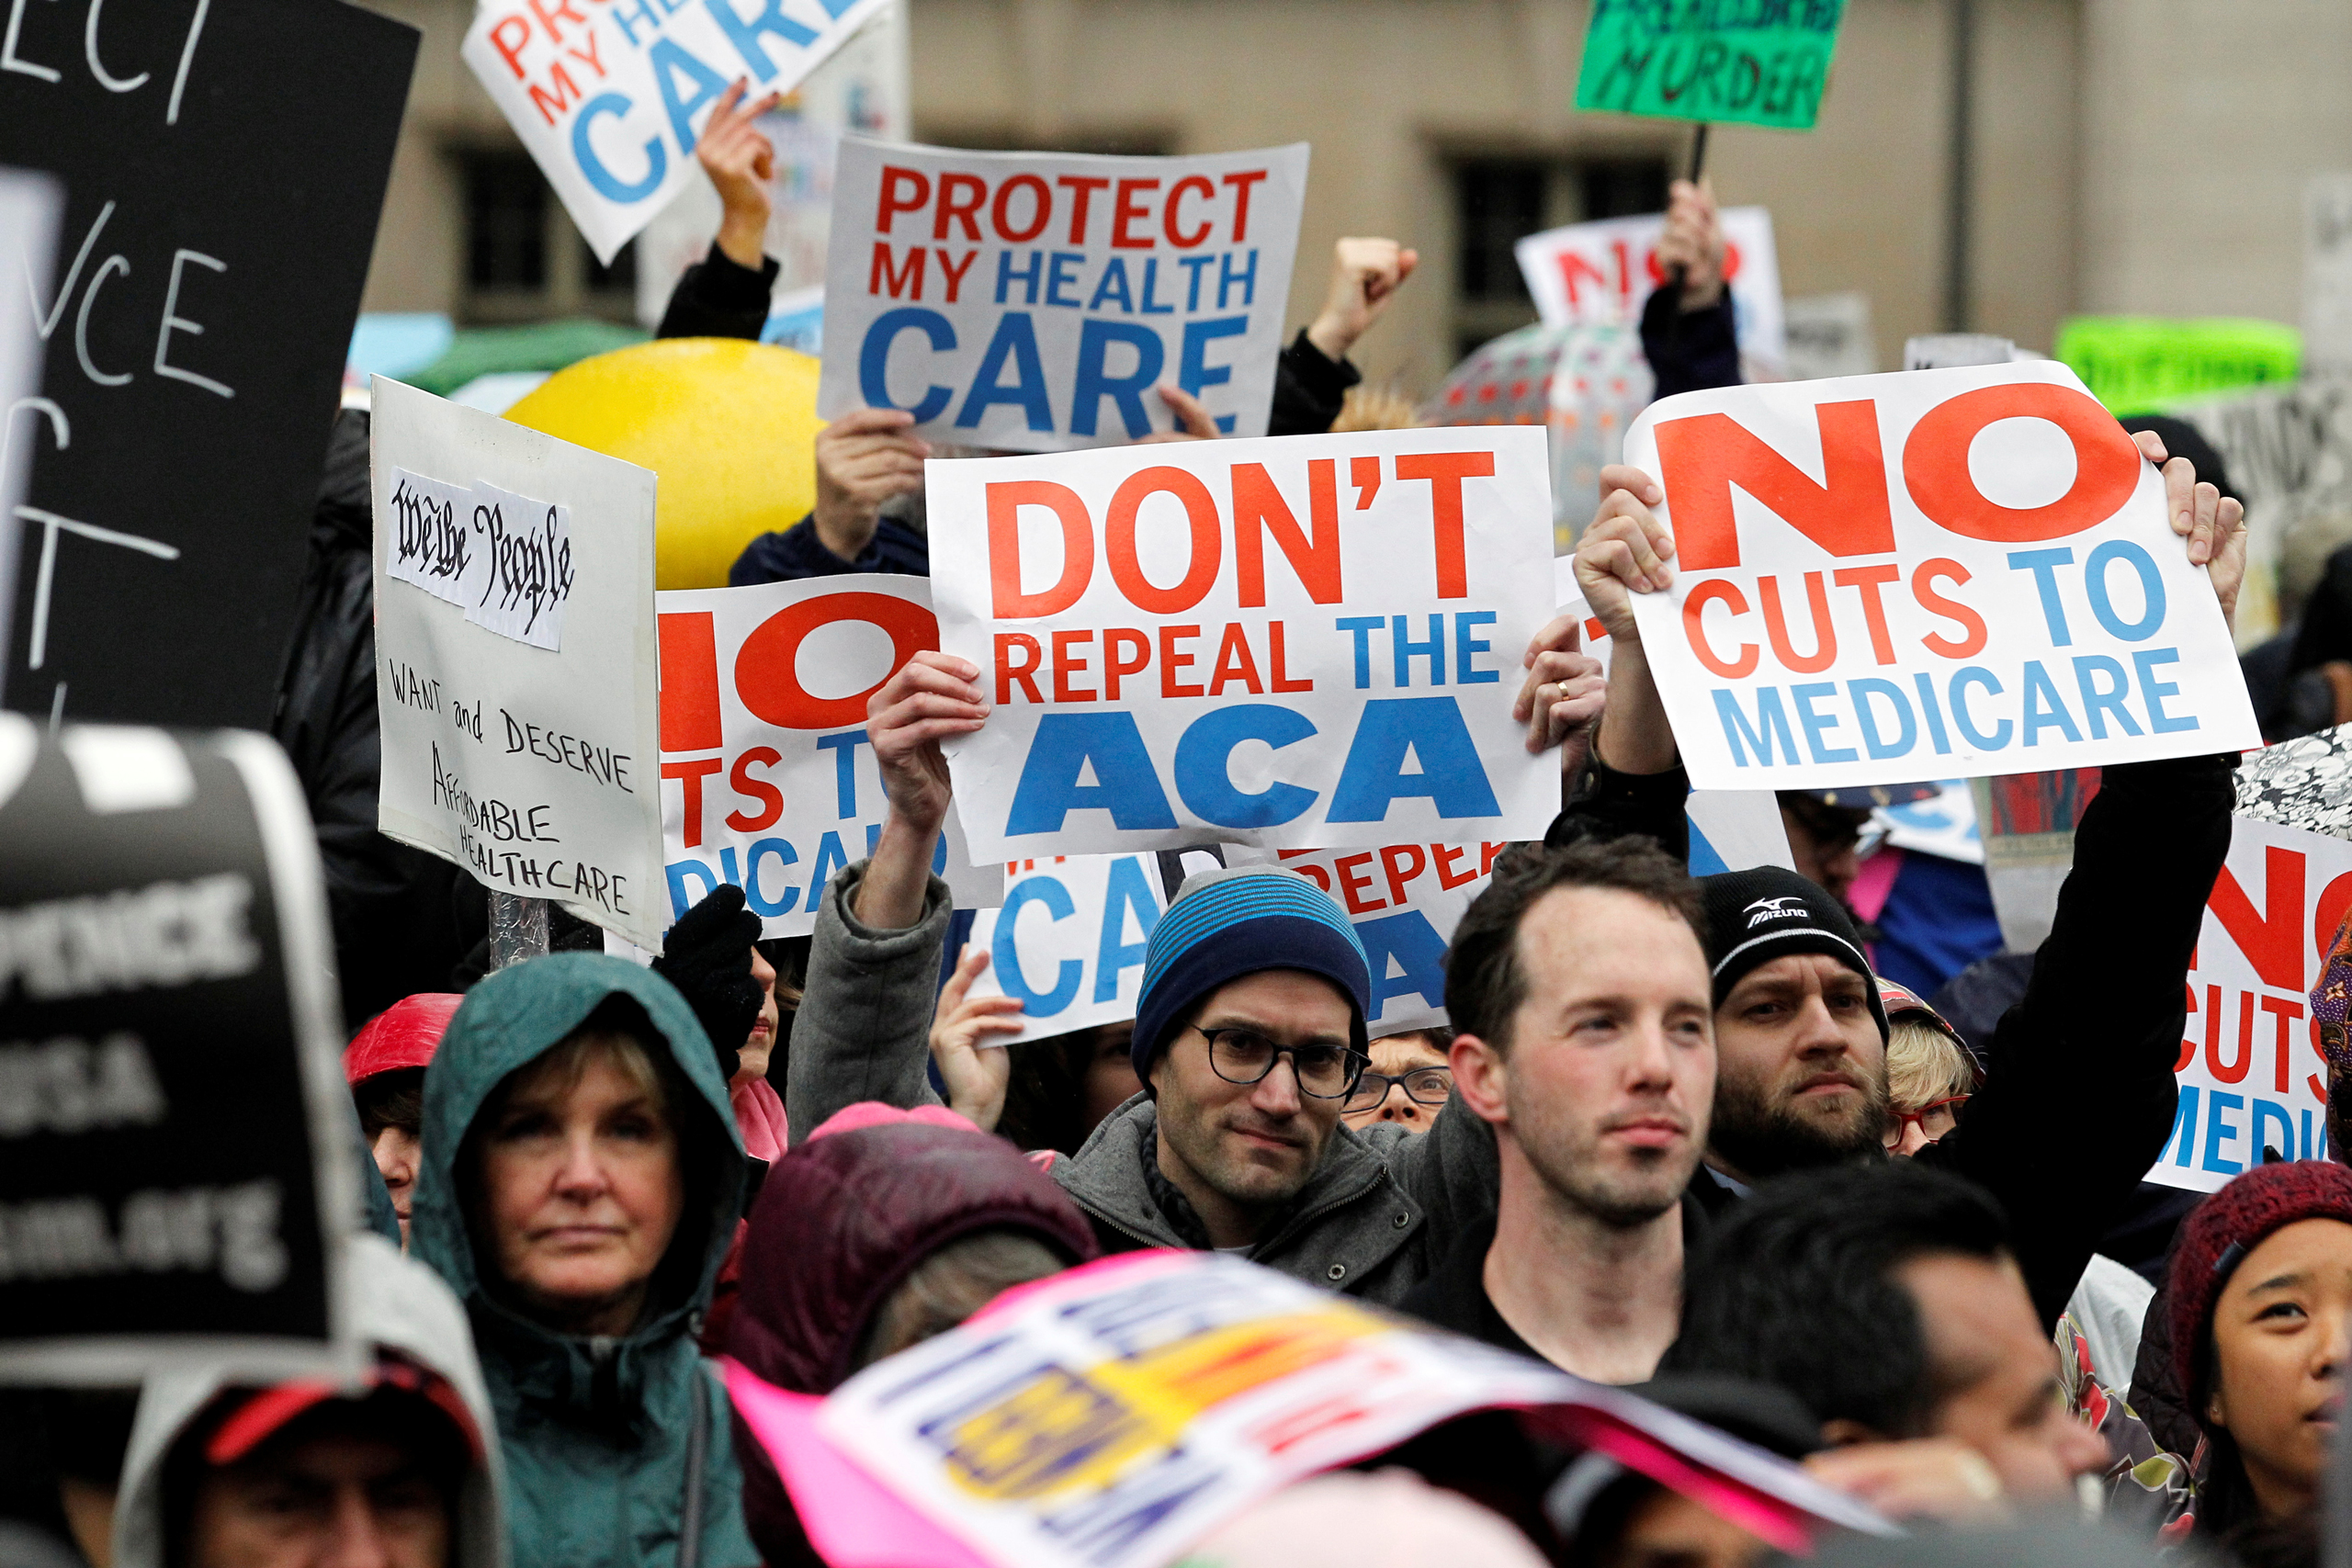 Demonstrators hold signs in support of the Affordable Care Act at a gathering before the start of a protest march near the hotel where House and Senate Republicans are attending a retreat in Philadelphia on Jan. 25, 2017. (Tom Mihalek—Reuters)